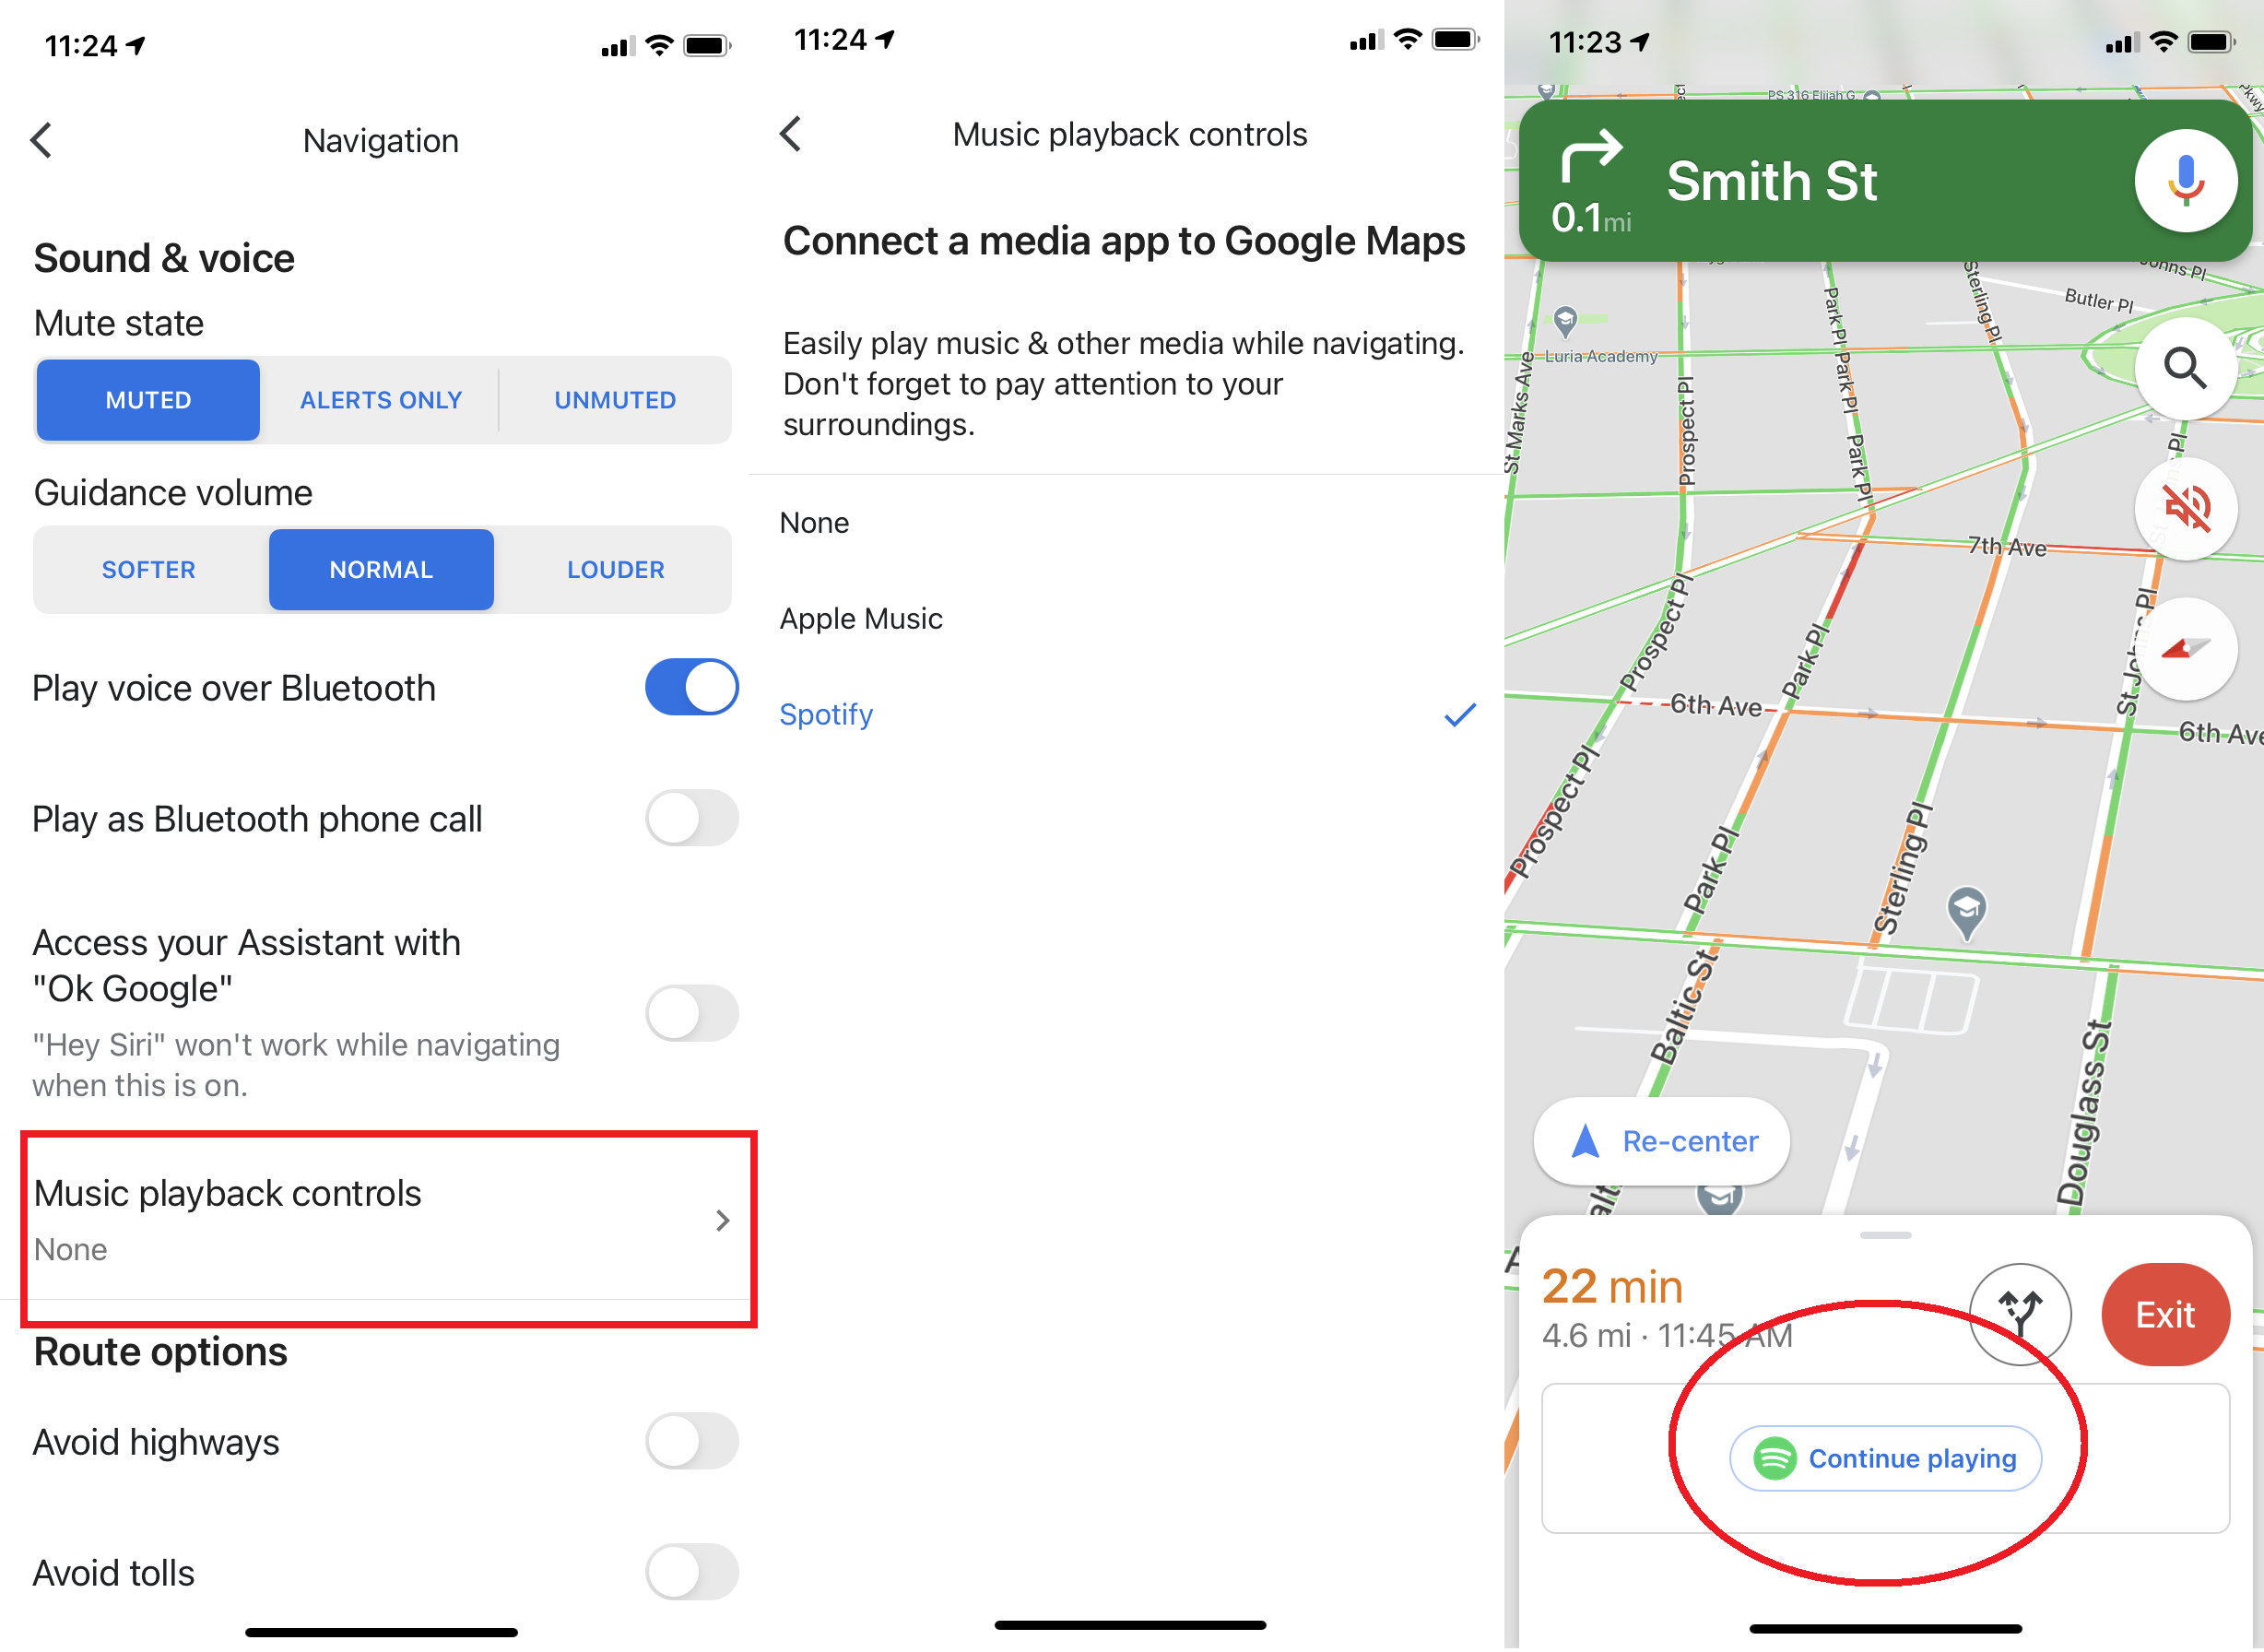 How to Stop Navigation Using Google Assistant